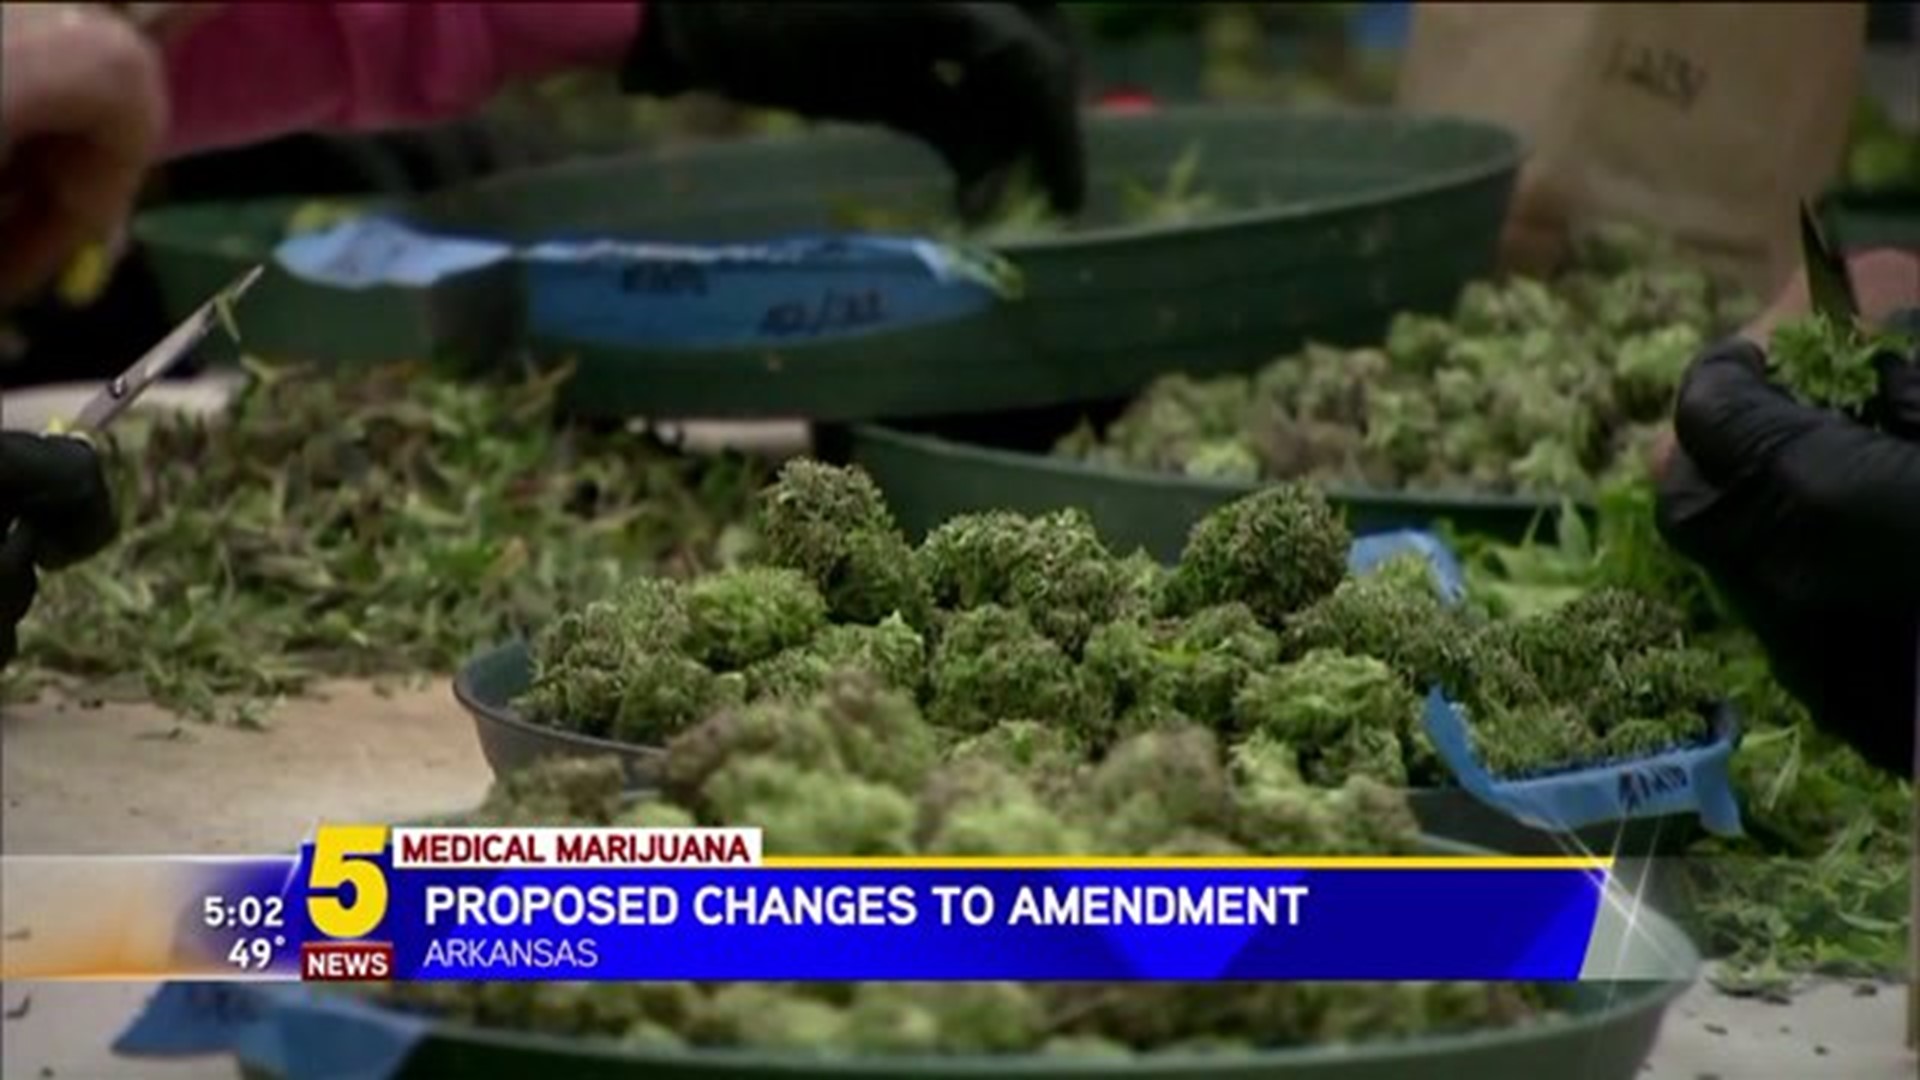 PROPOSED CHANGES TO AMENDMENT